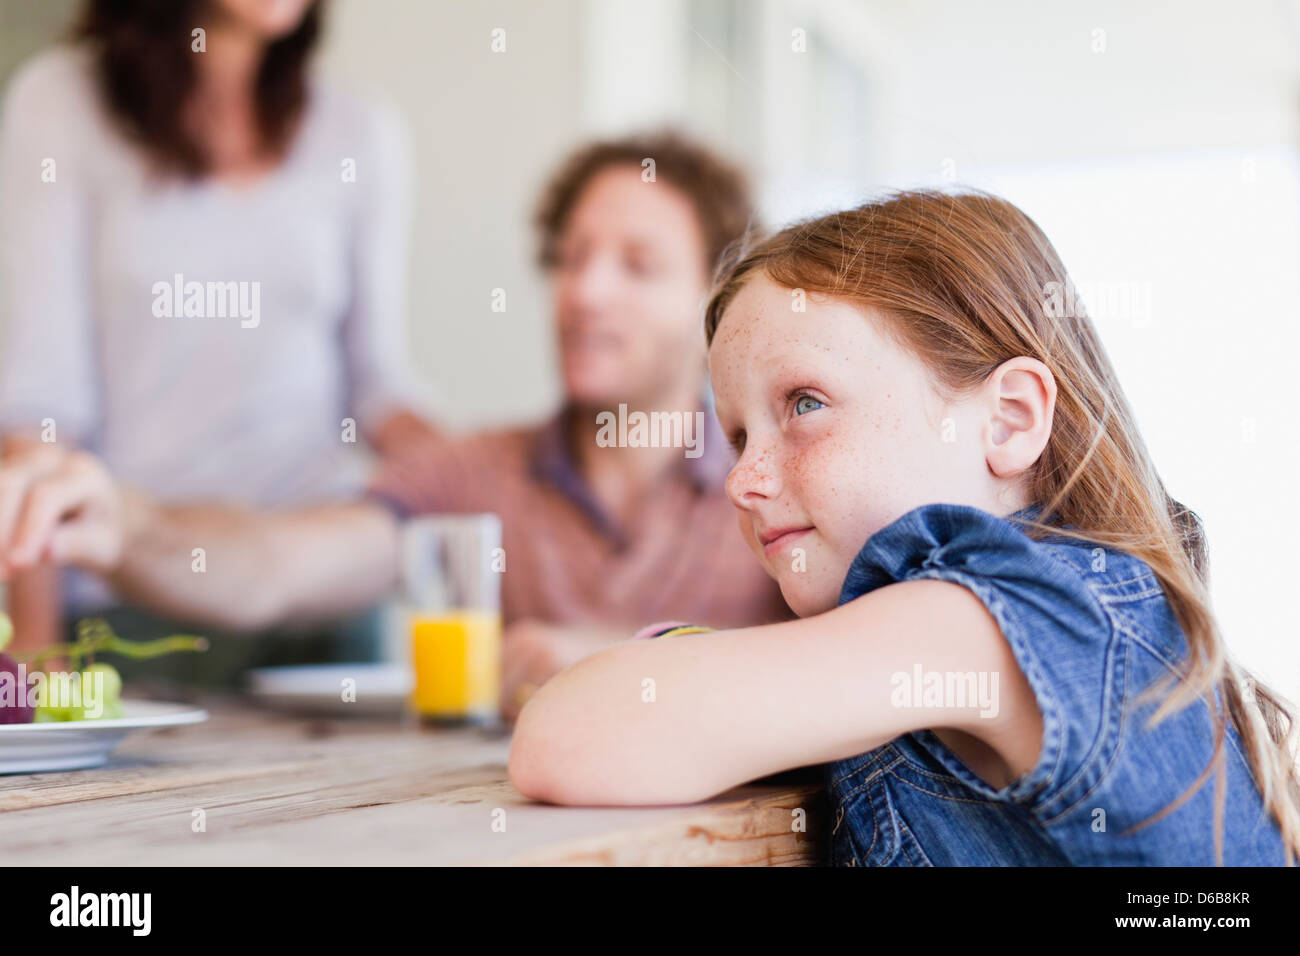 Girl sitting at breakfast table Stock Photo